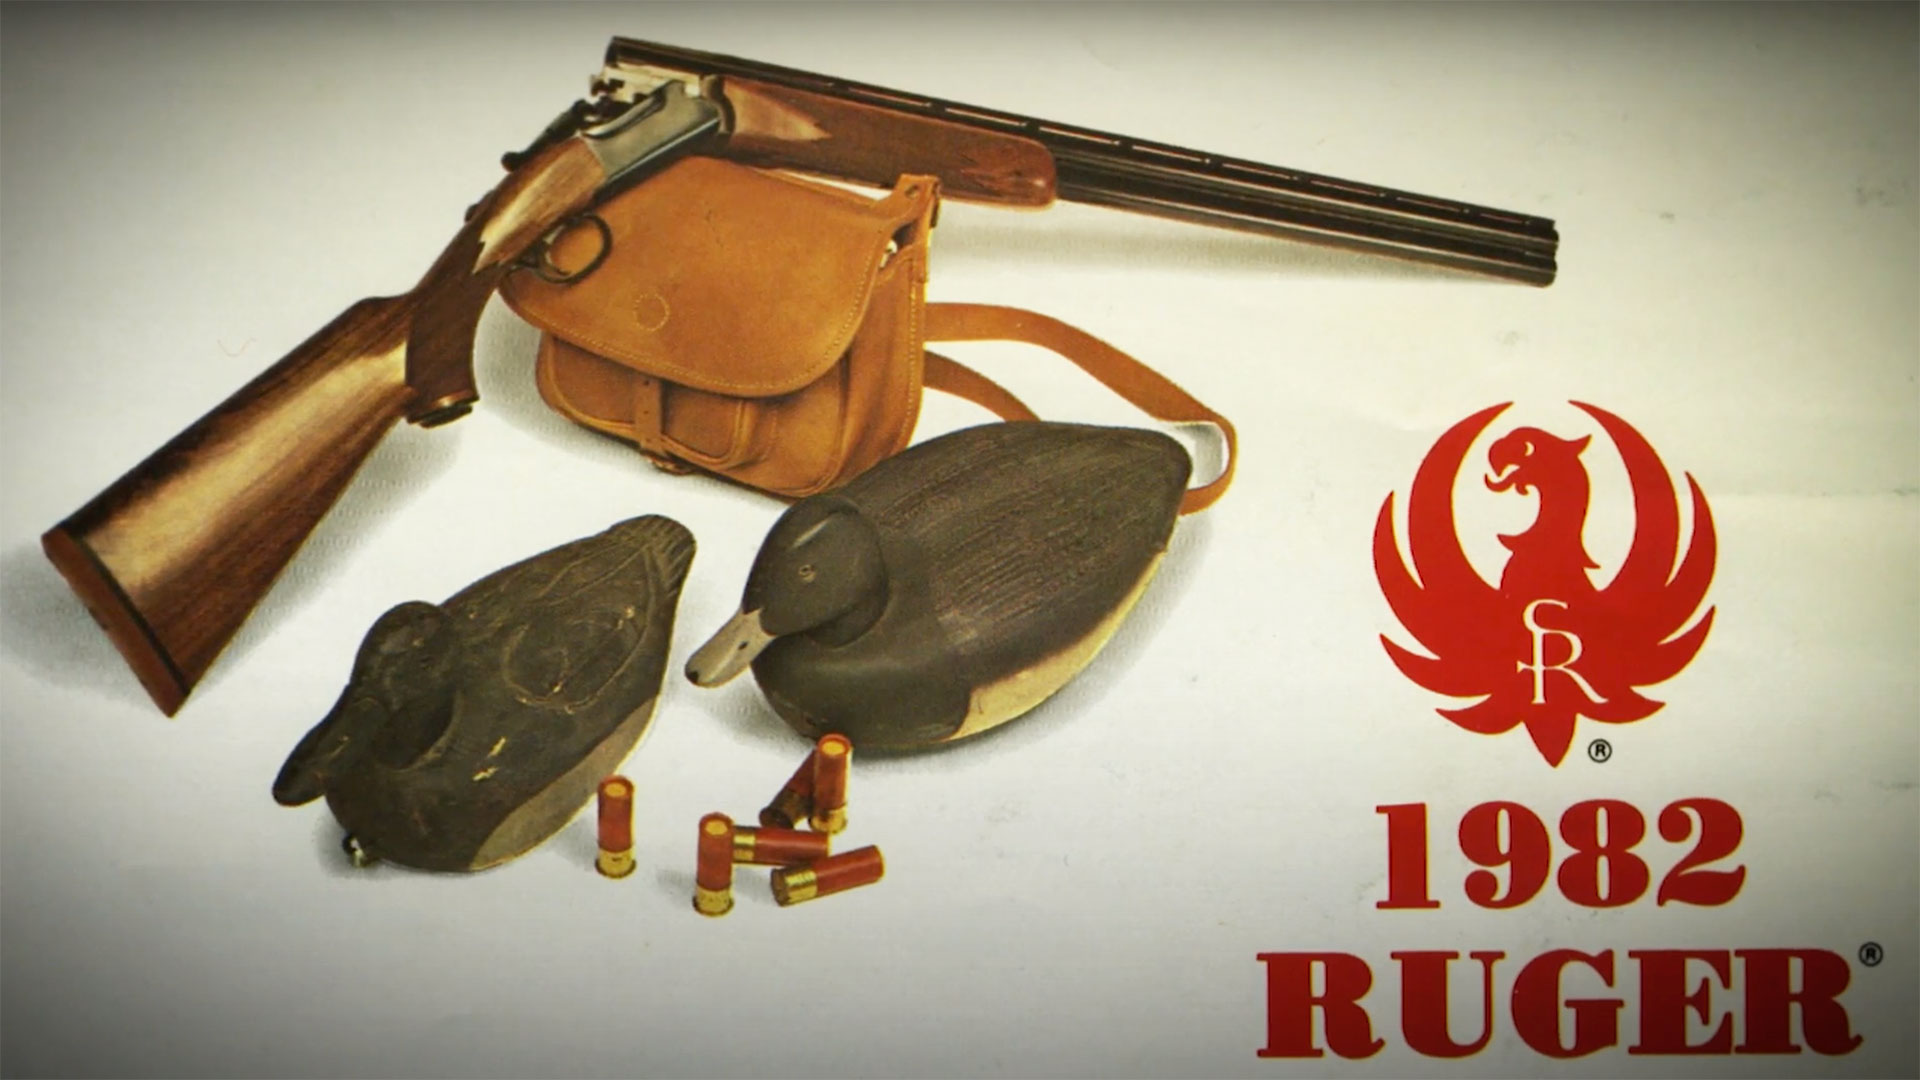 A Ruger Red Label over-under shotgun add from 1982.